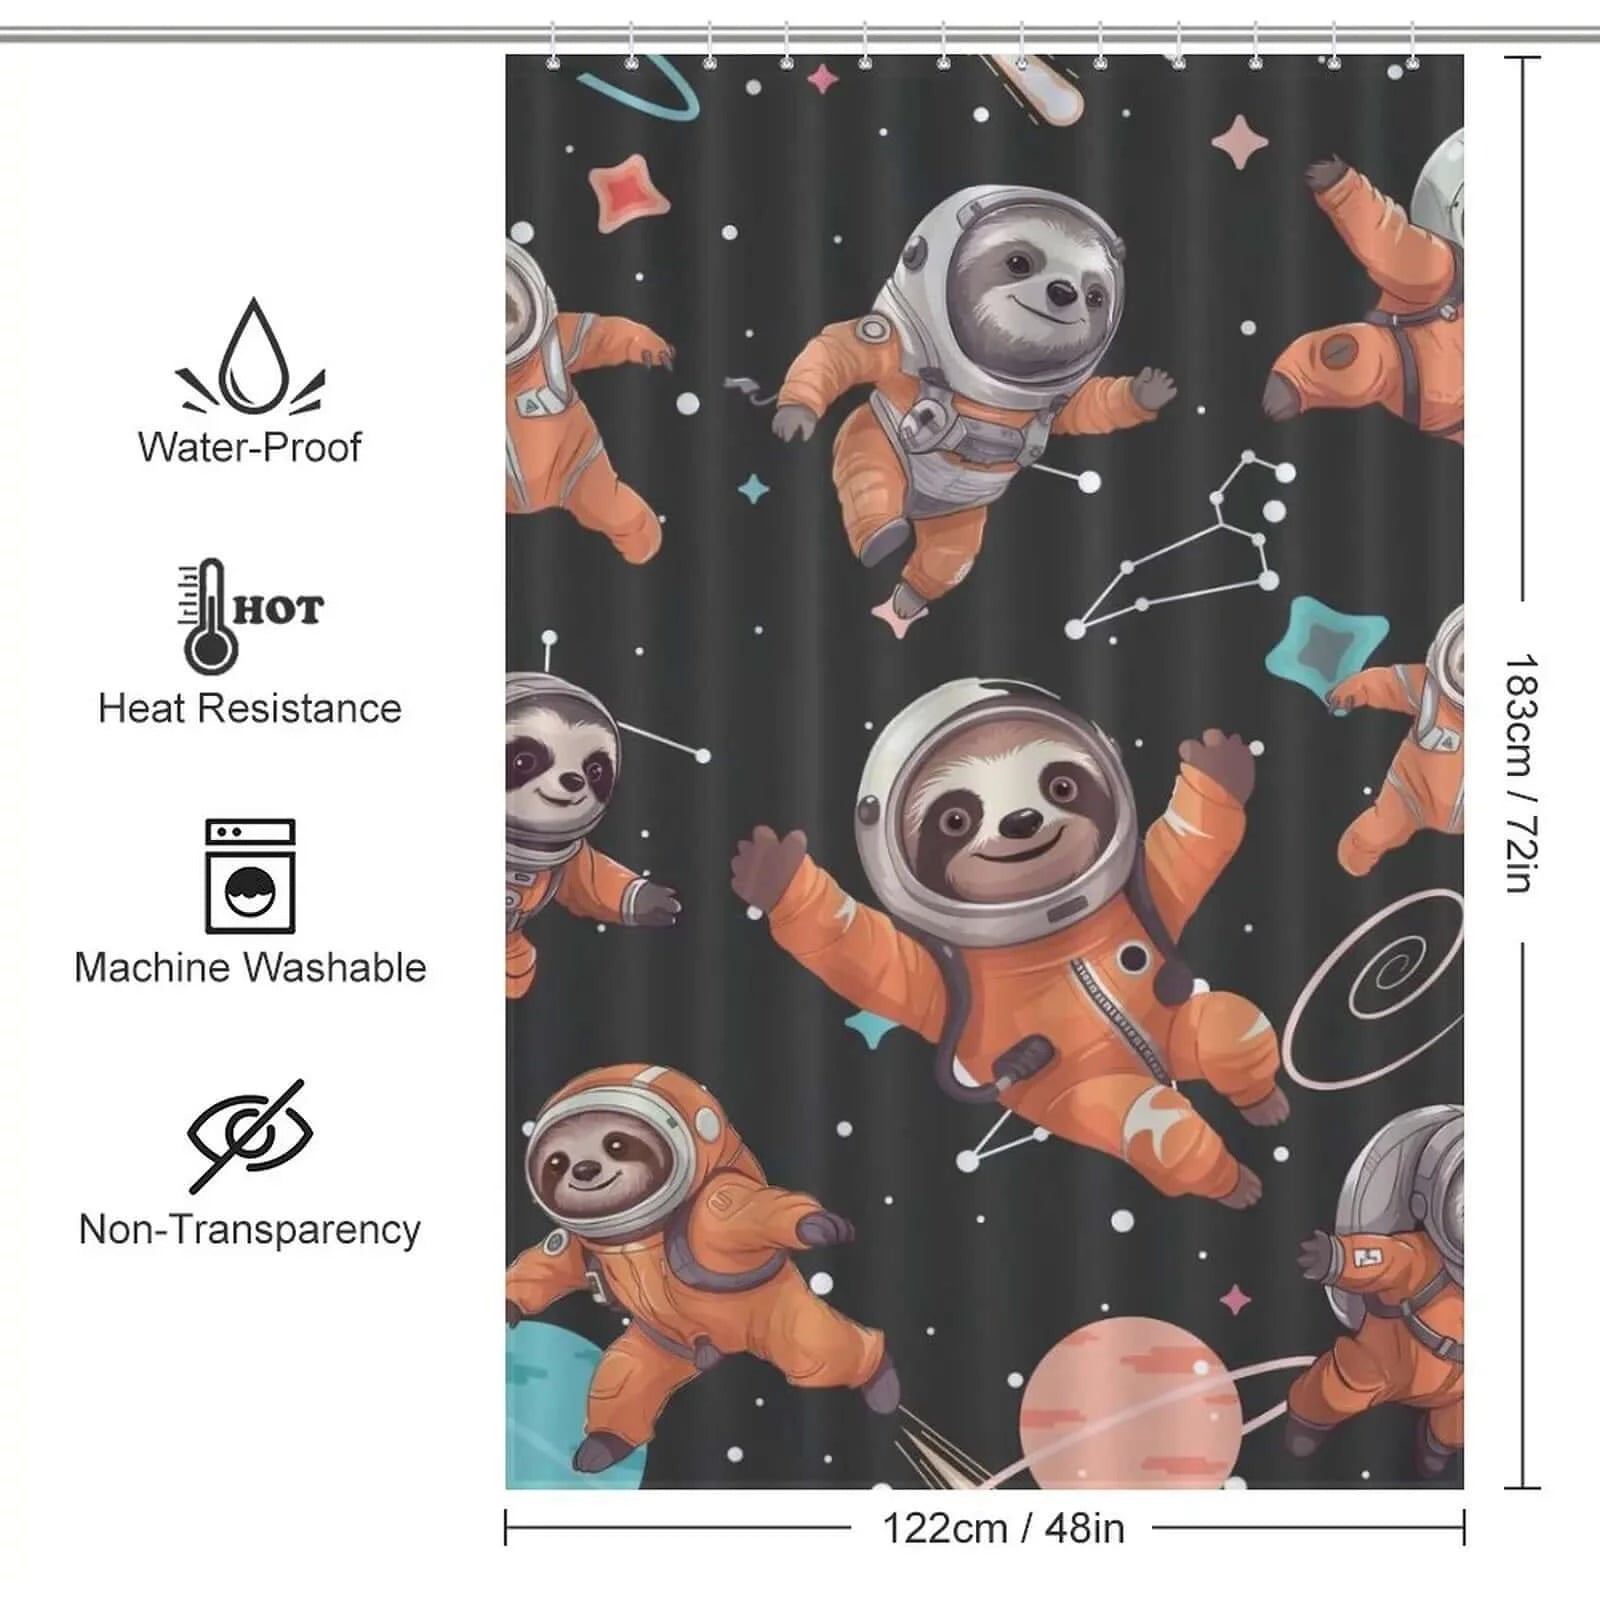 This Sloth Astronauts Shower Curtain-Cottoncat, designed by Cotton Cat, features adorable sloths and astronauts and is designed to be durable for long-lasting use.